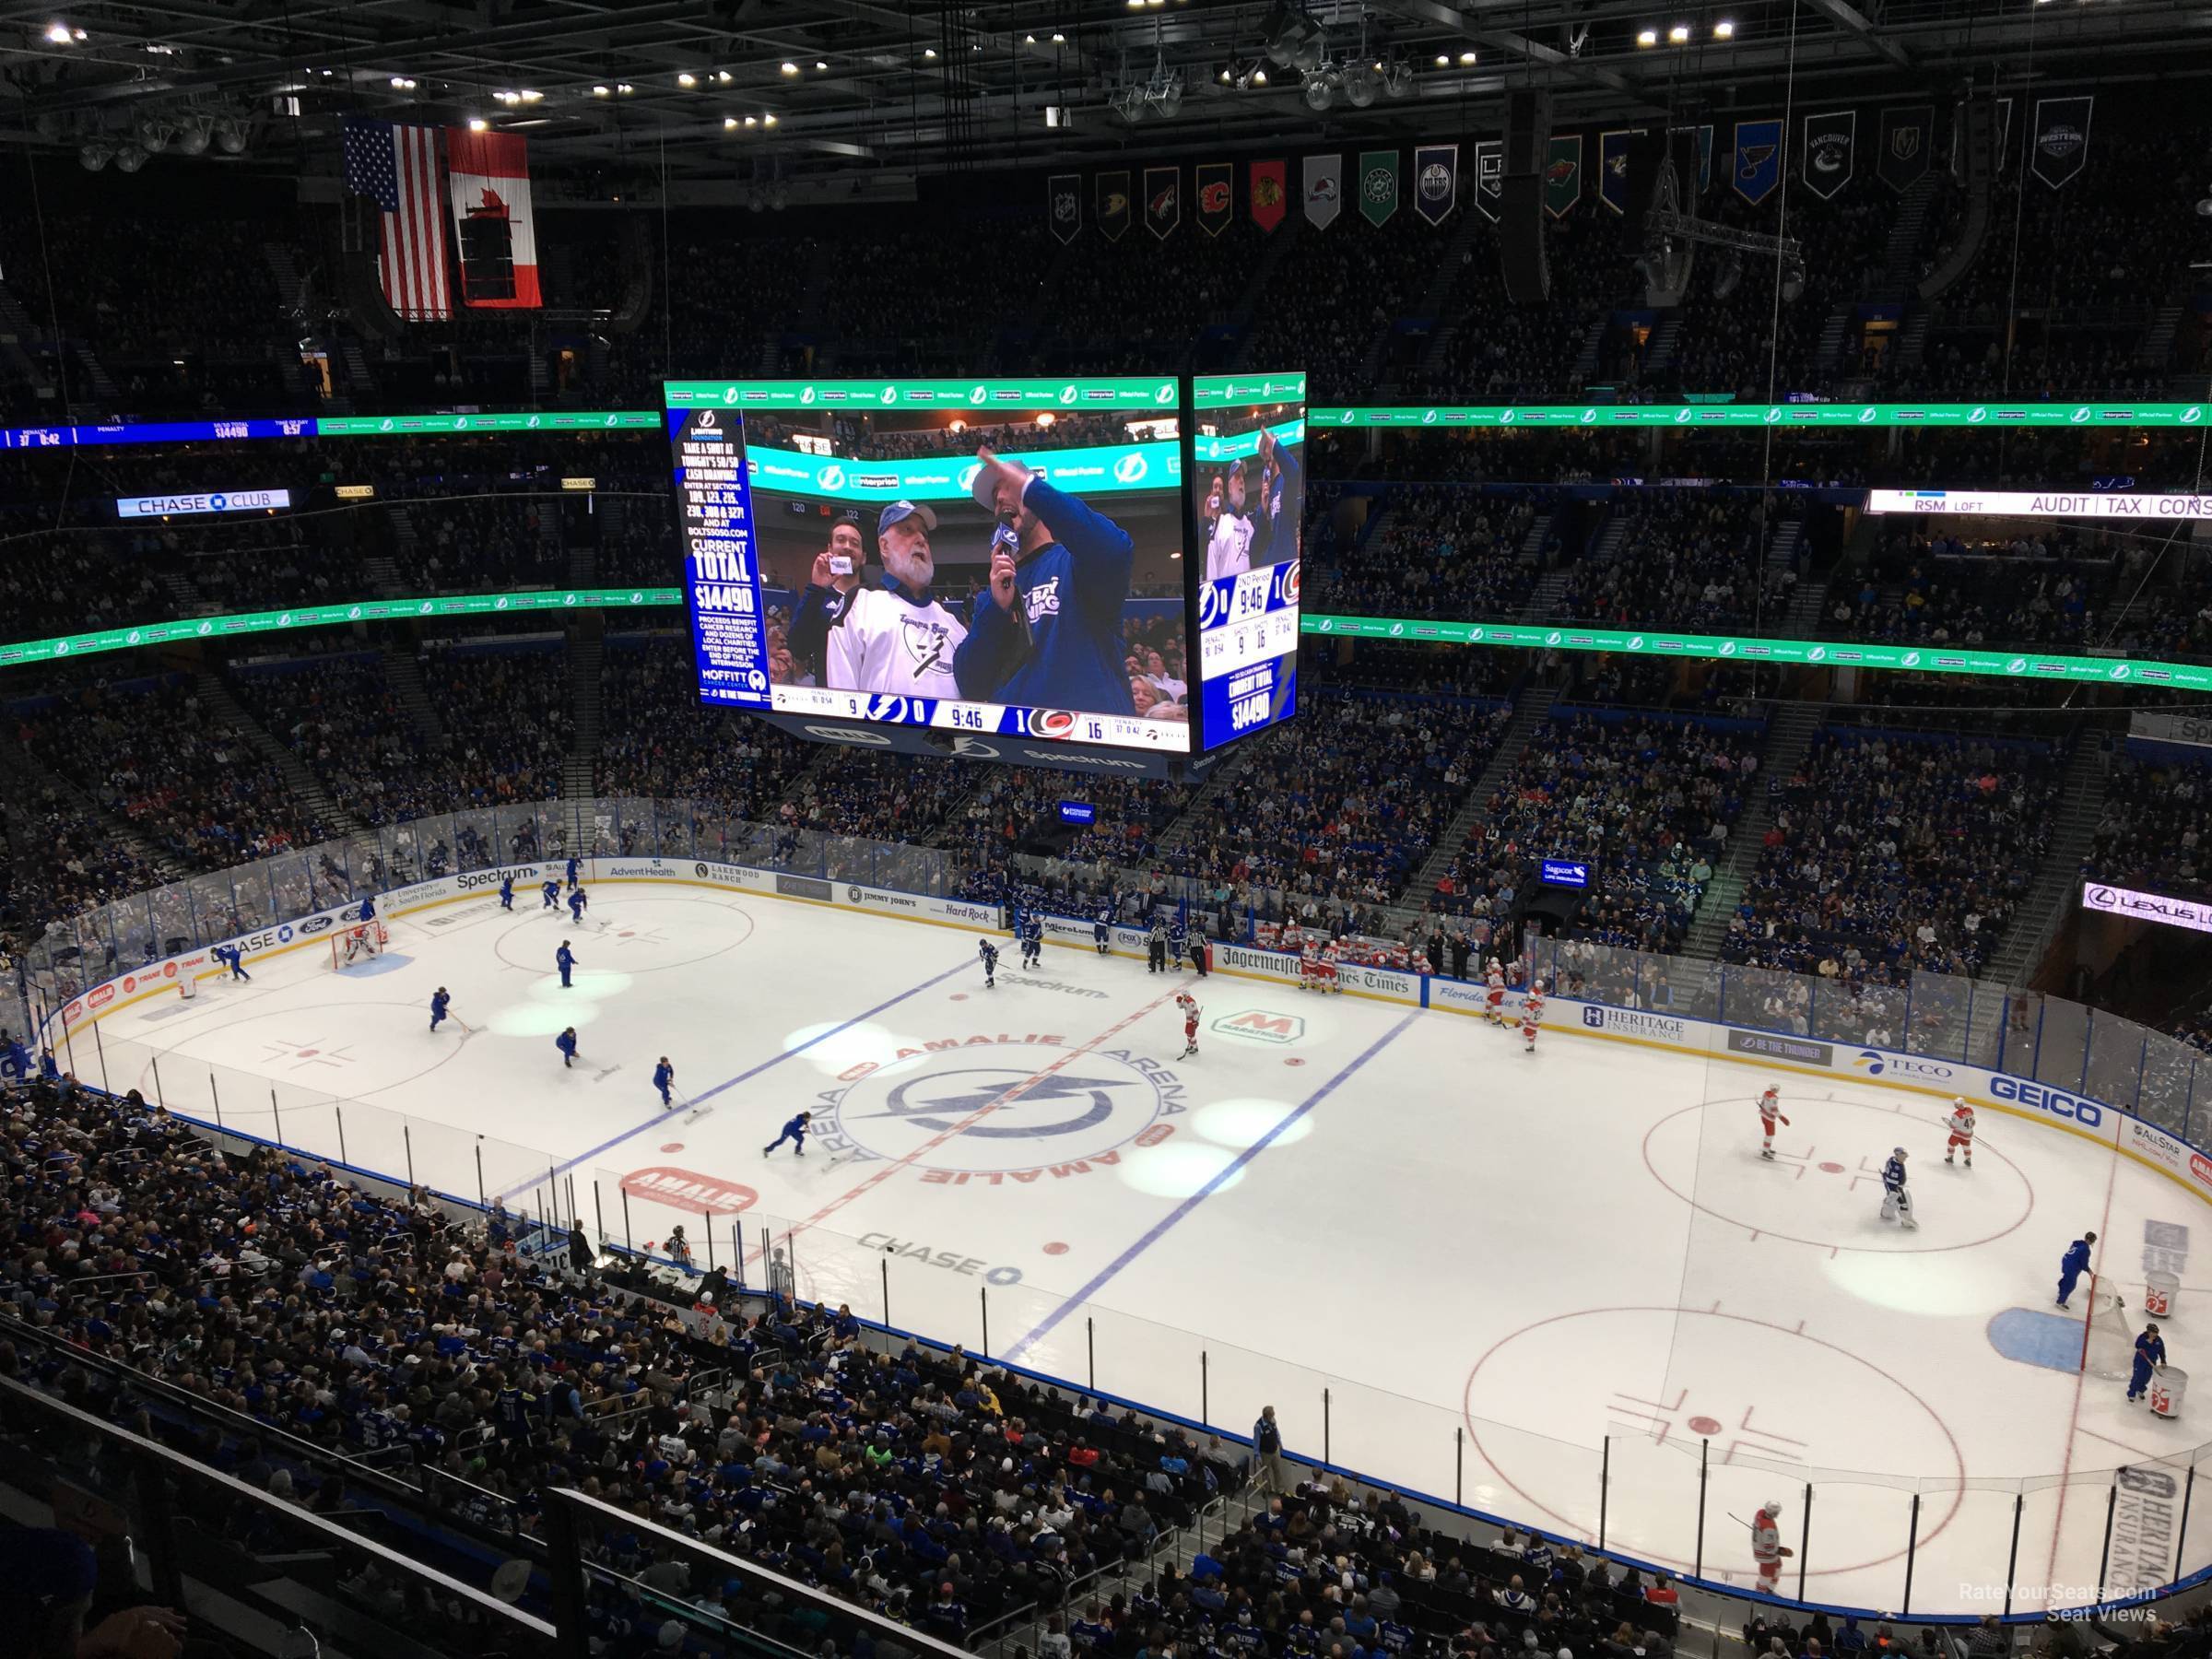 Section 309 at Amalie Arena 